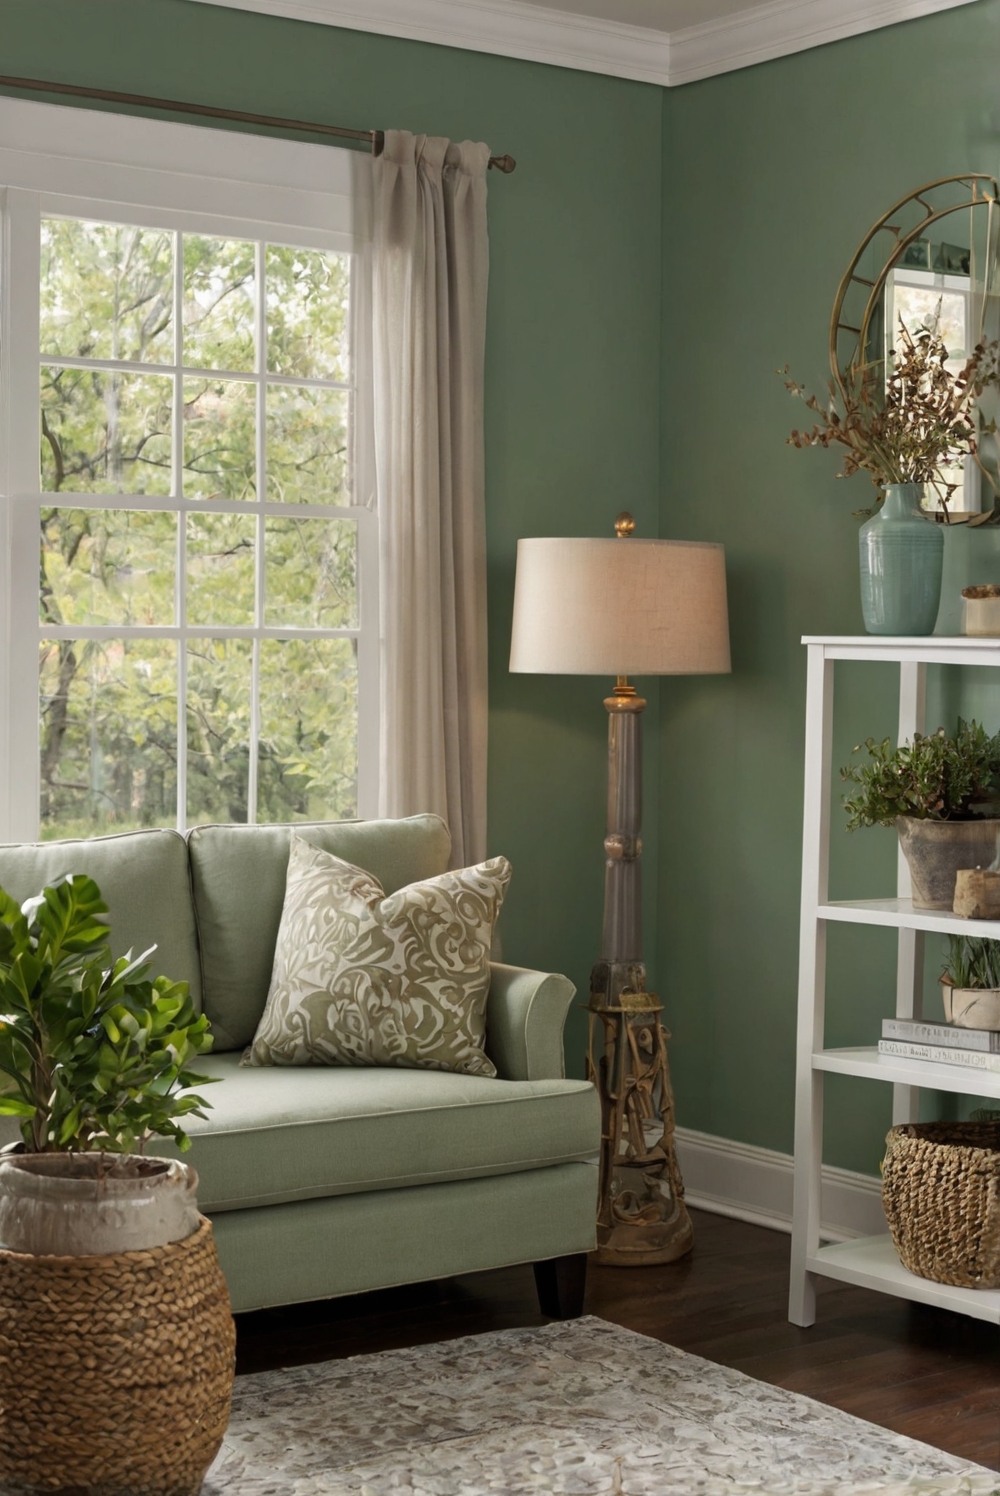 acacia haze paint, elegant green gray, sherwin williams, wall paint color, interior design, home decor, space planning